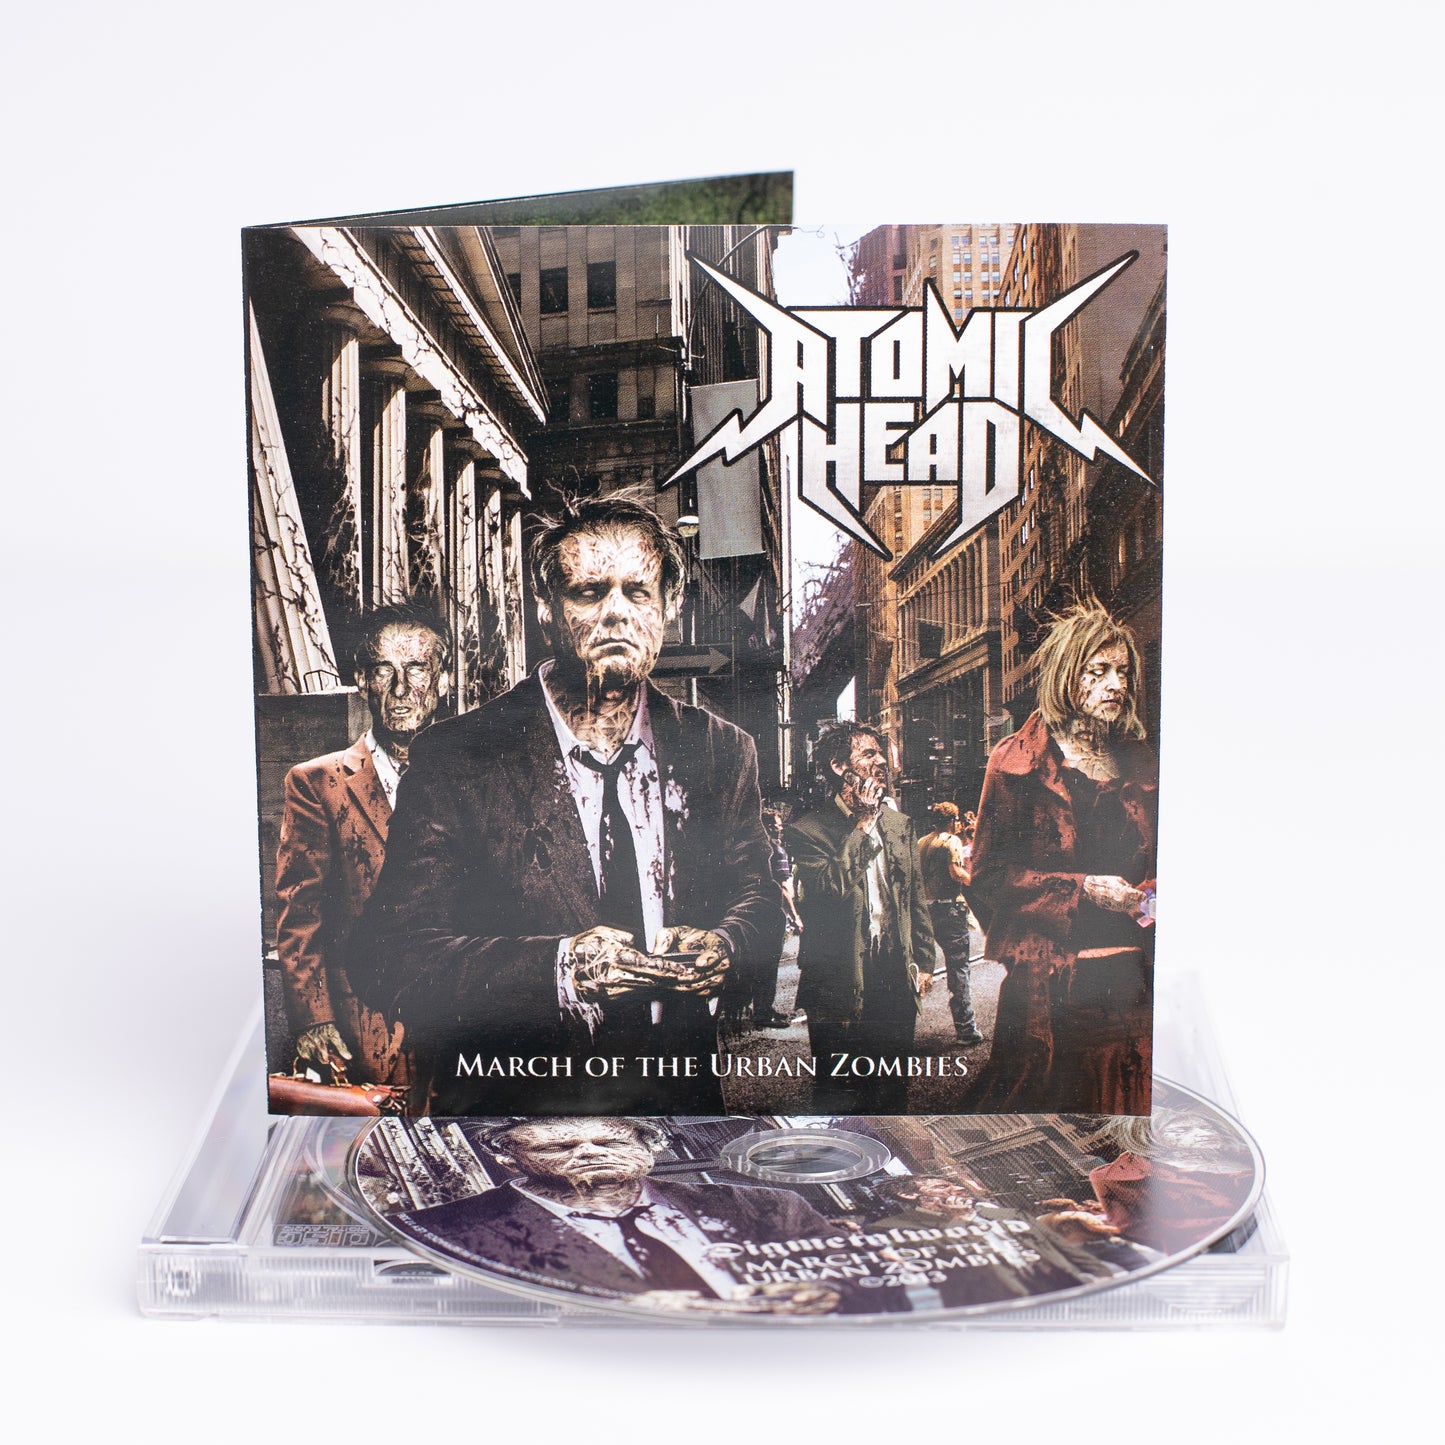 ATOMIC HEAD - March of the urban zombies (Jewel case)